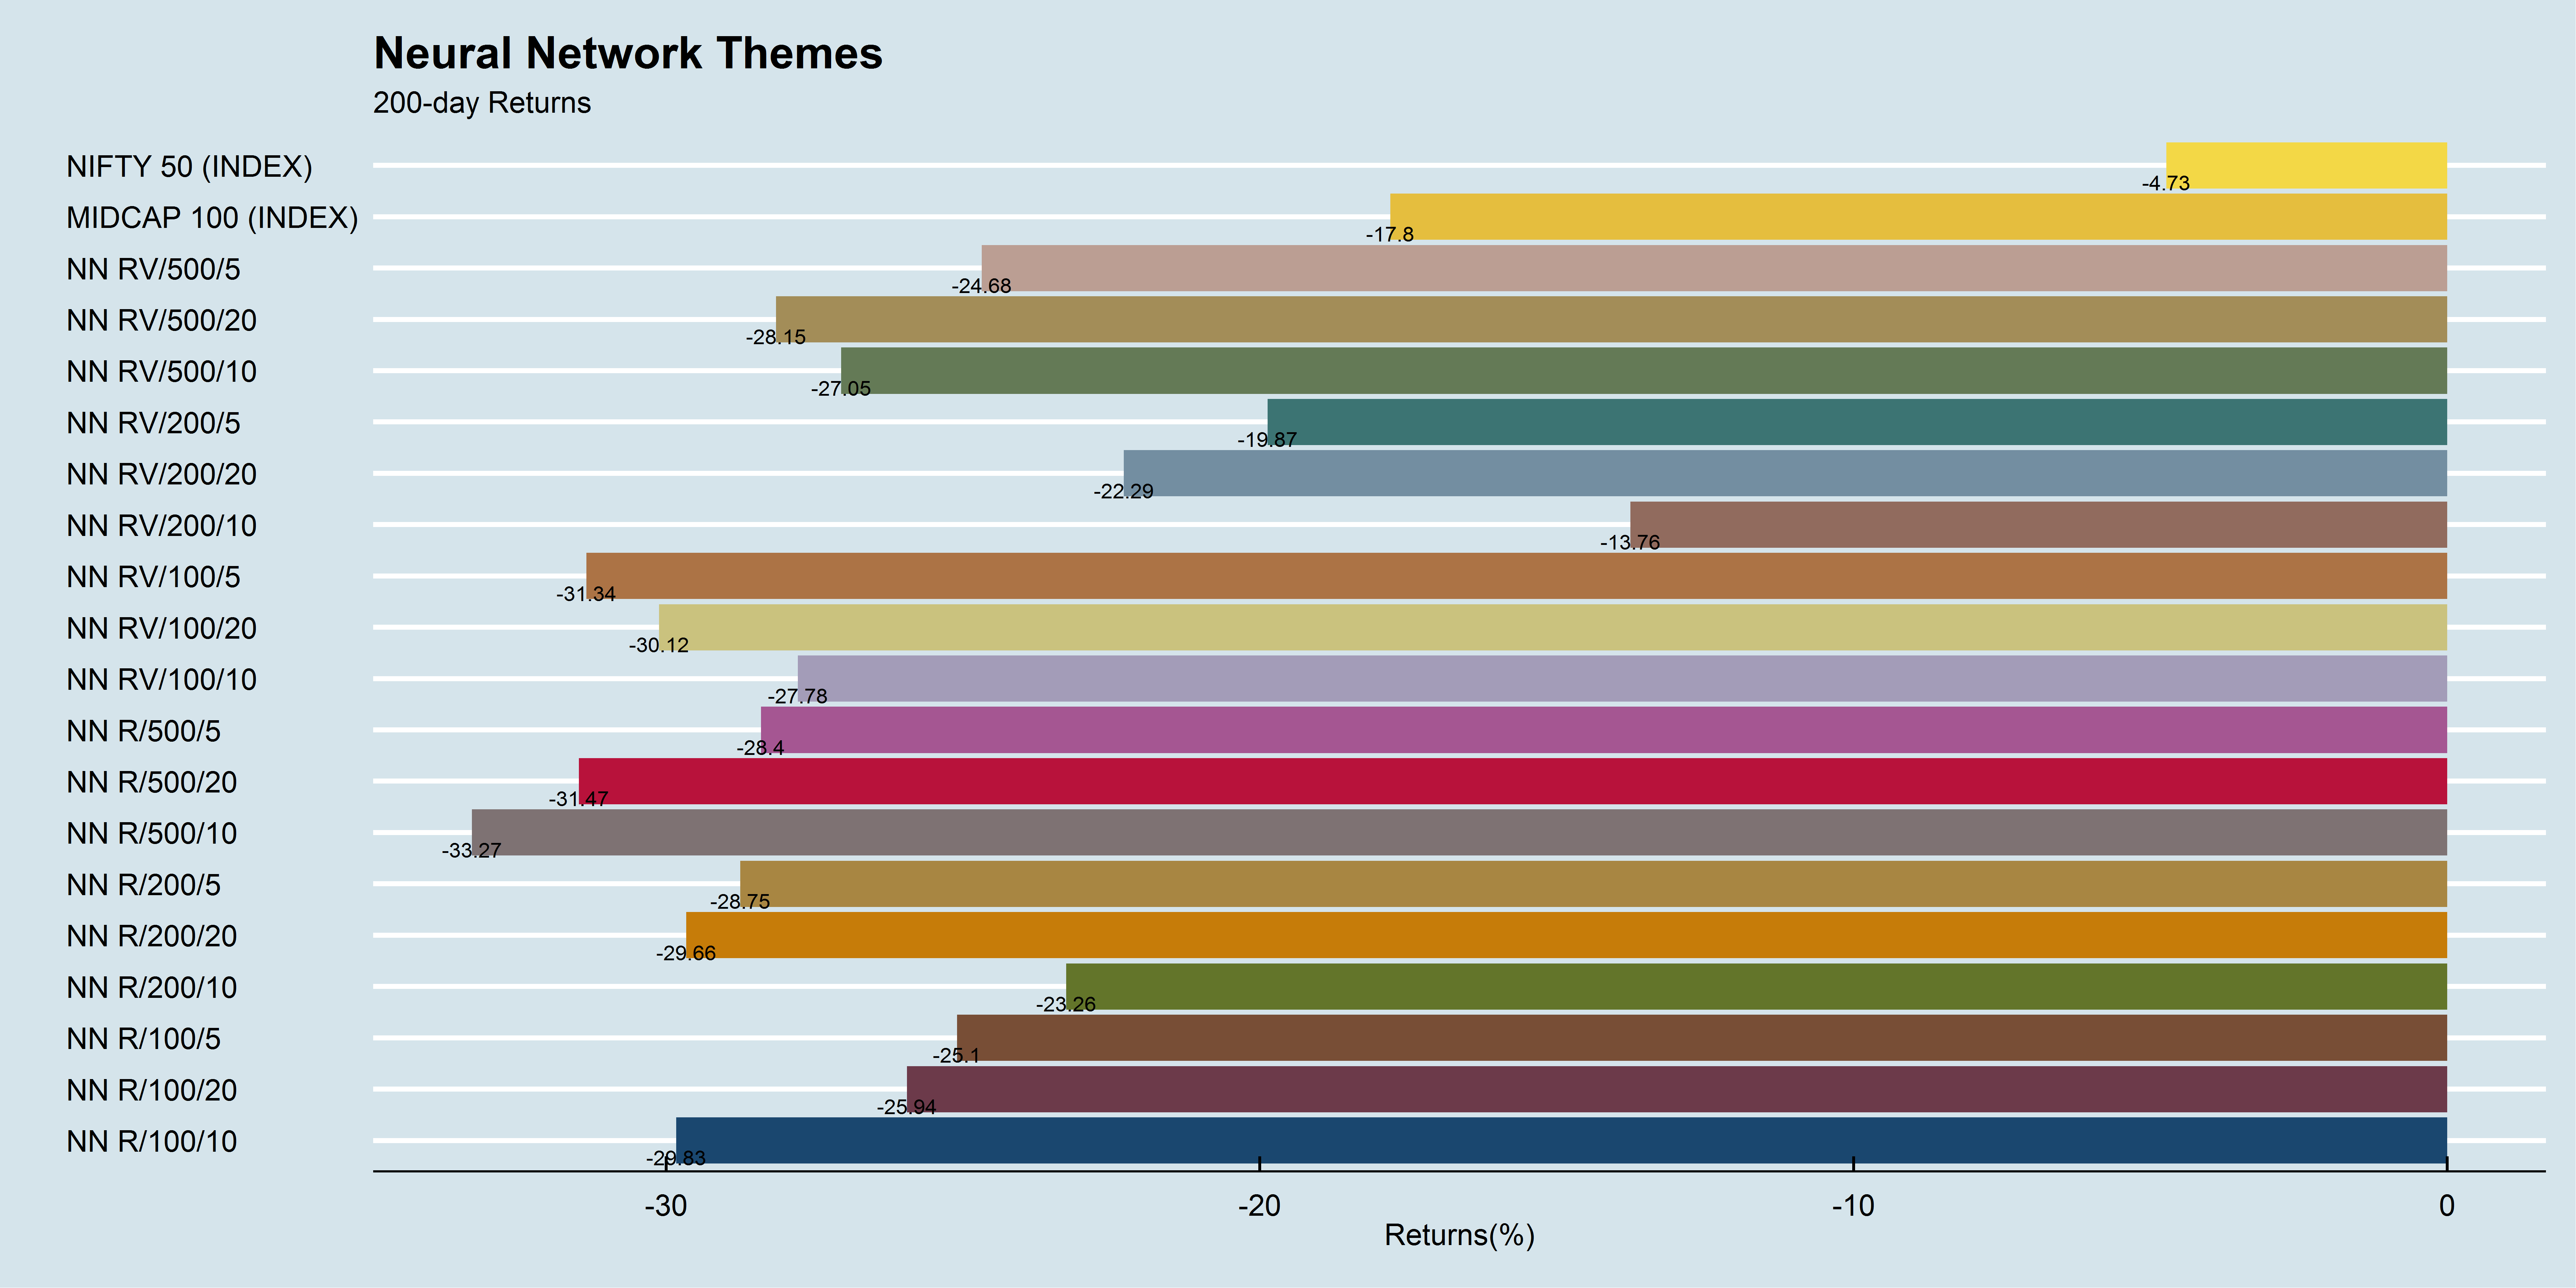 Neural Network Themes 200-day performance